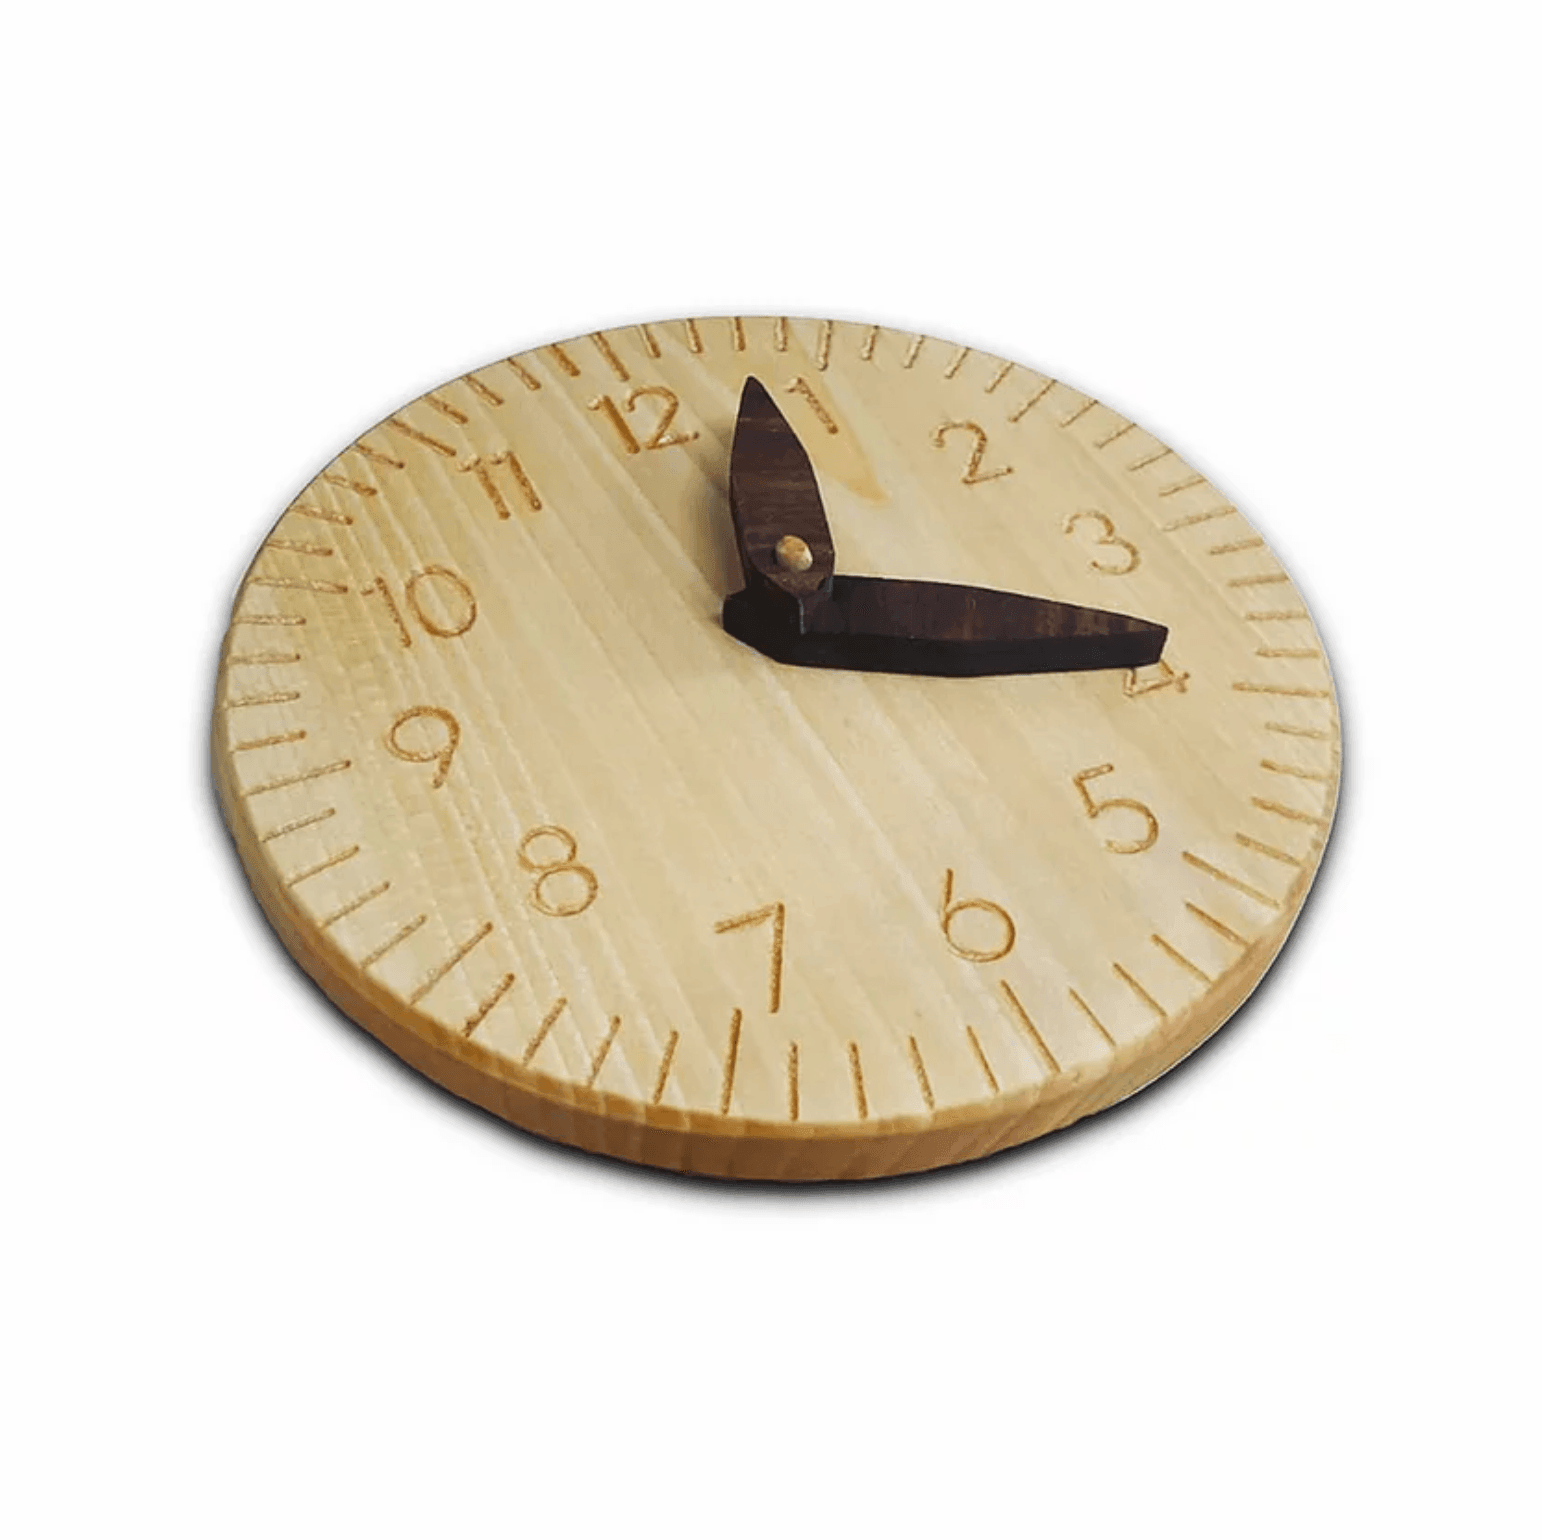 Wooden Clock - Why and Whale